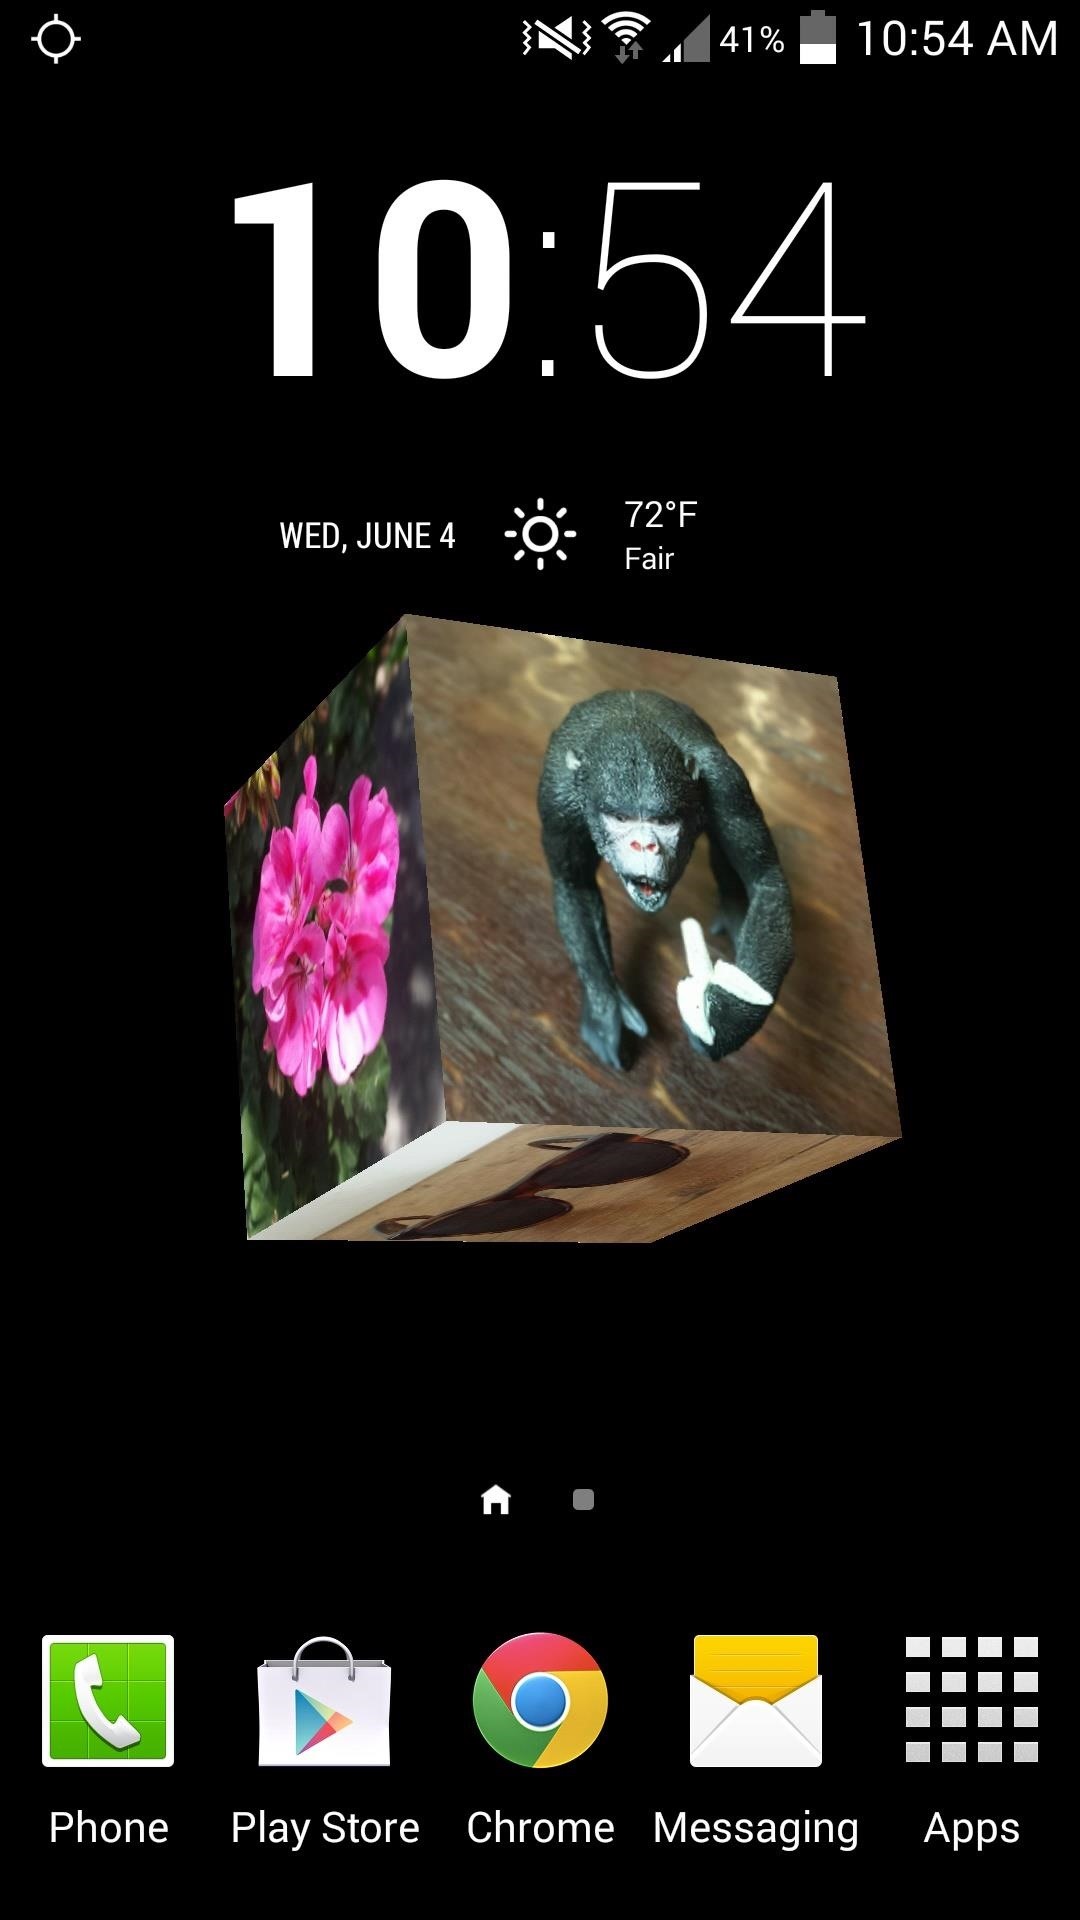 How to Create a Rotating 3D Cube Live Wallpaper on Your Galaxy S4